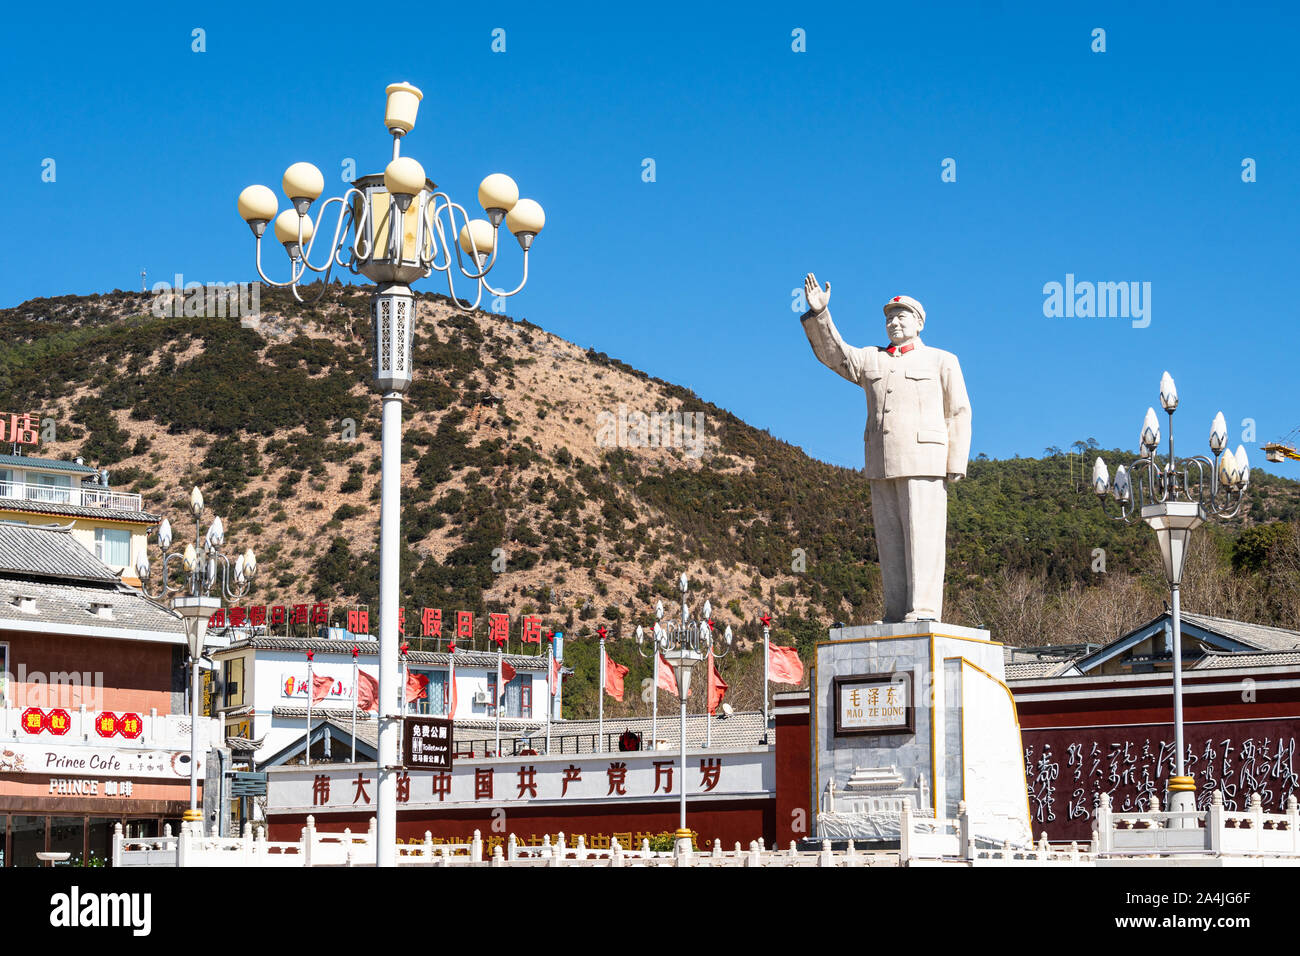 Lijiang, China - February 13 2019: Statue of Chairman Mao Zedong stand in Lijiang people square in Yunnan province on a sunny day Stock Photo